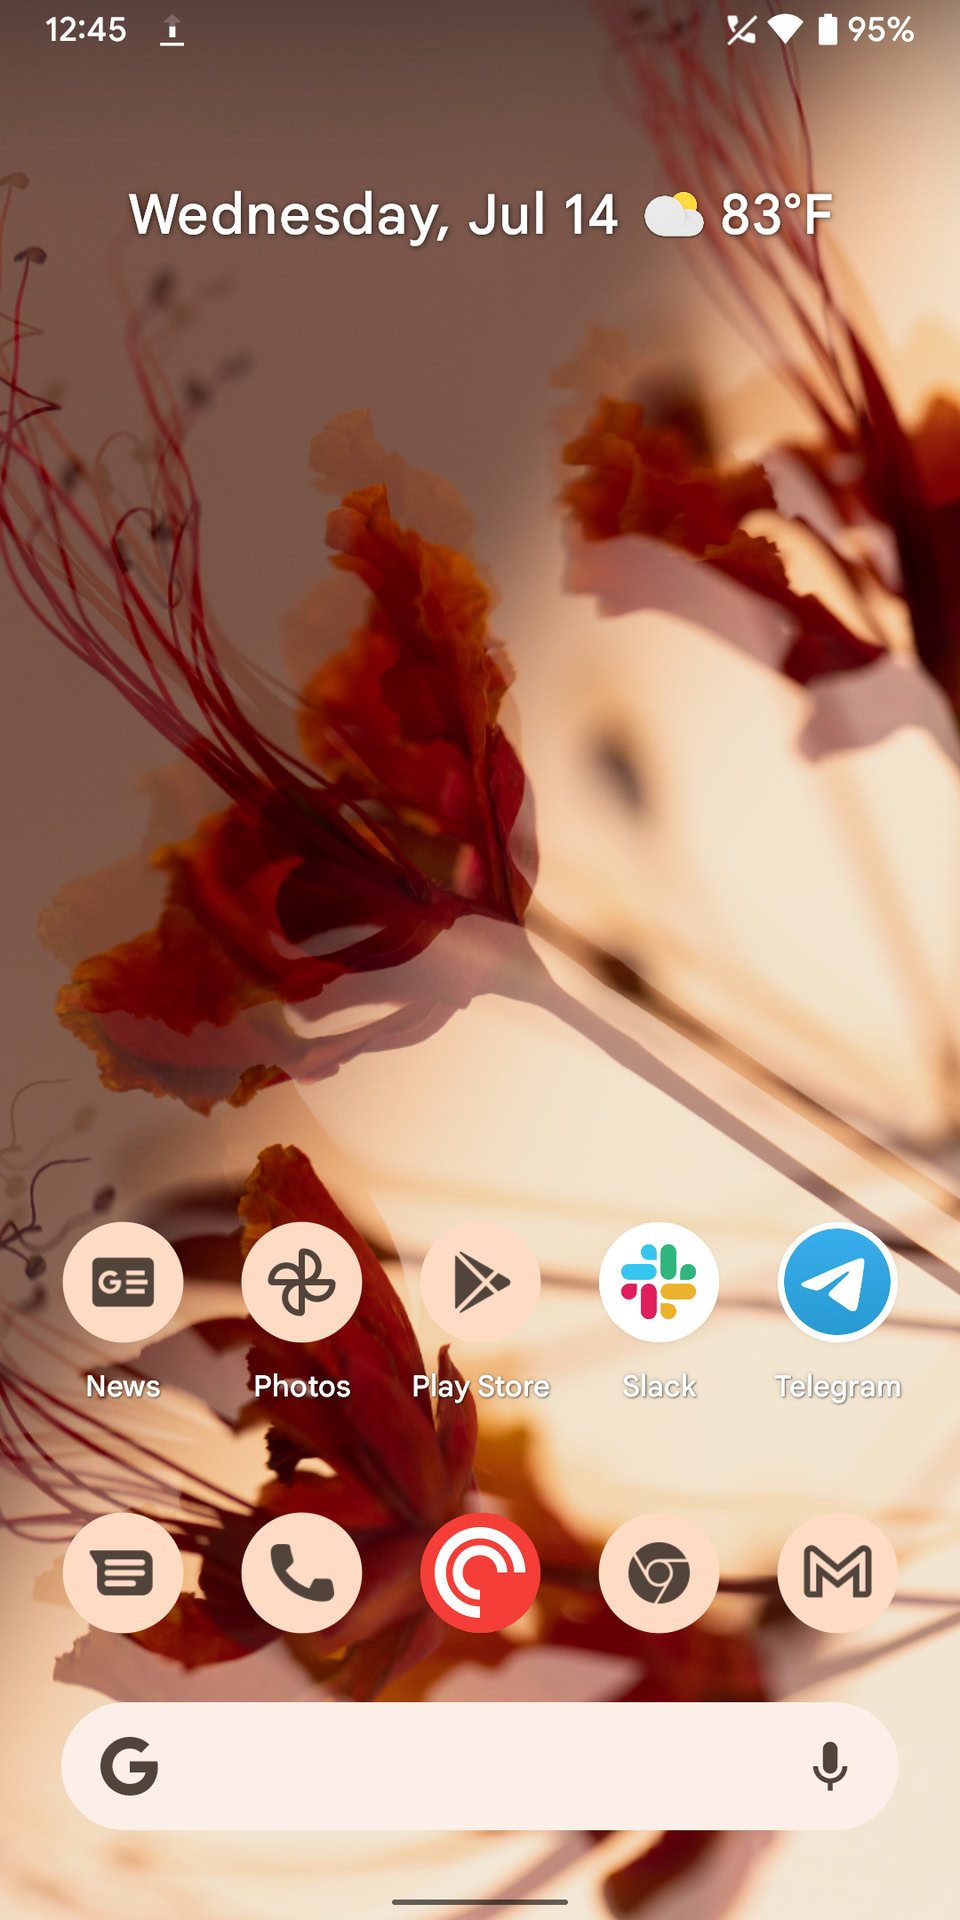 Pixel 'Wallpaper & Style' app redesigned for Android 12 - Android Authority